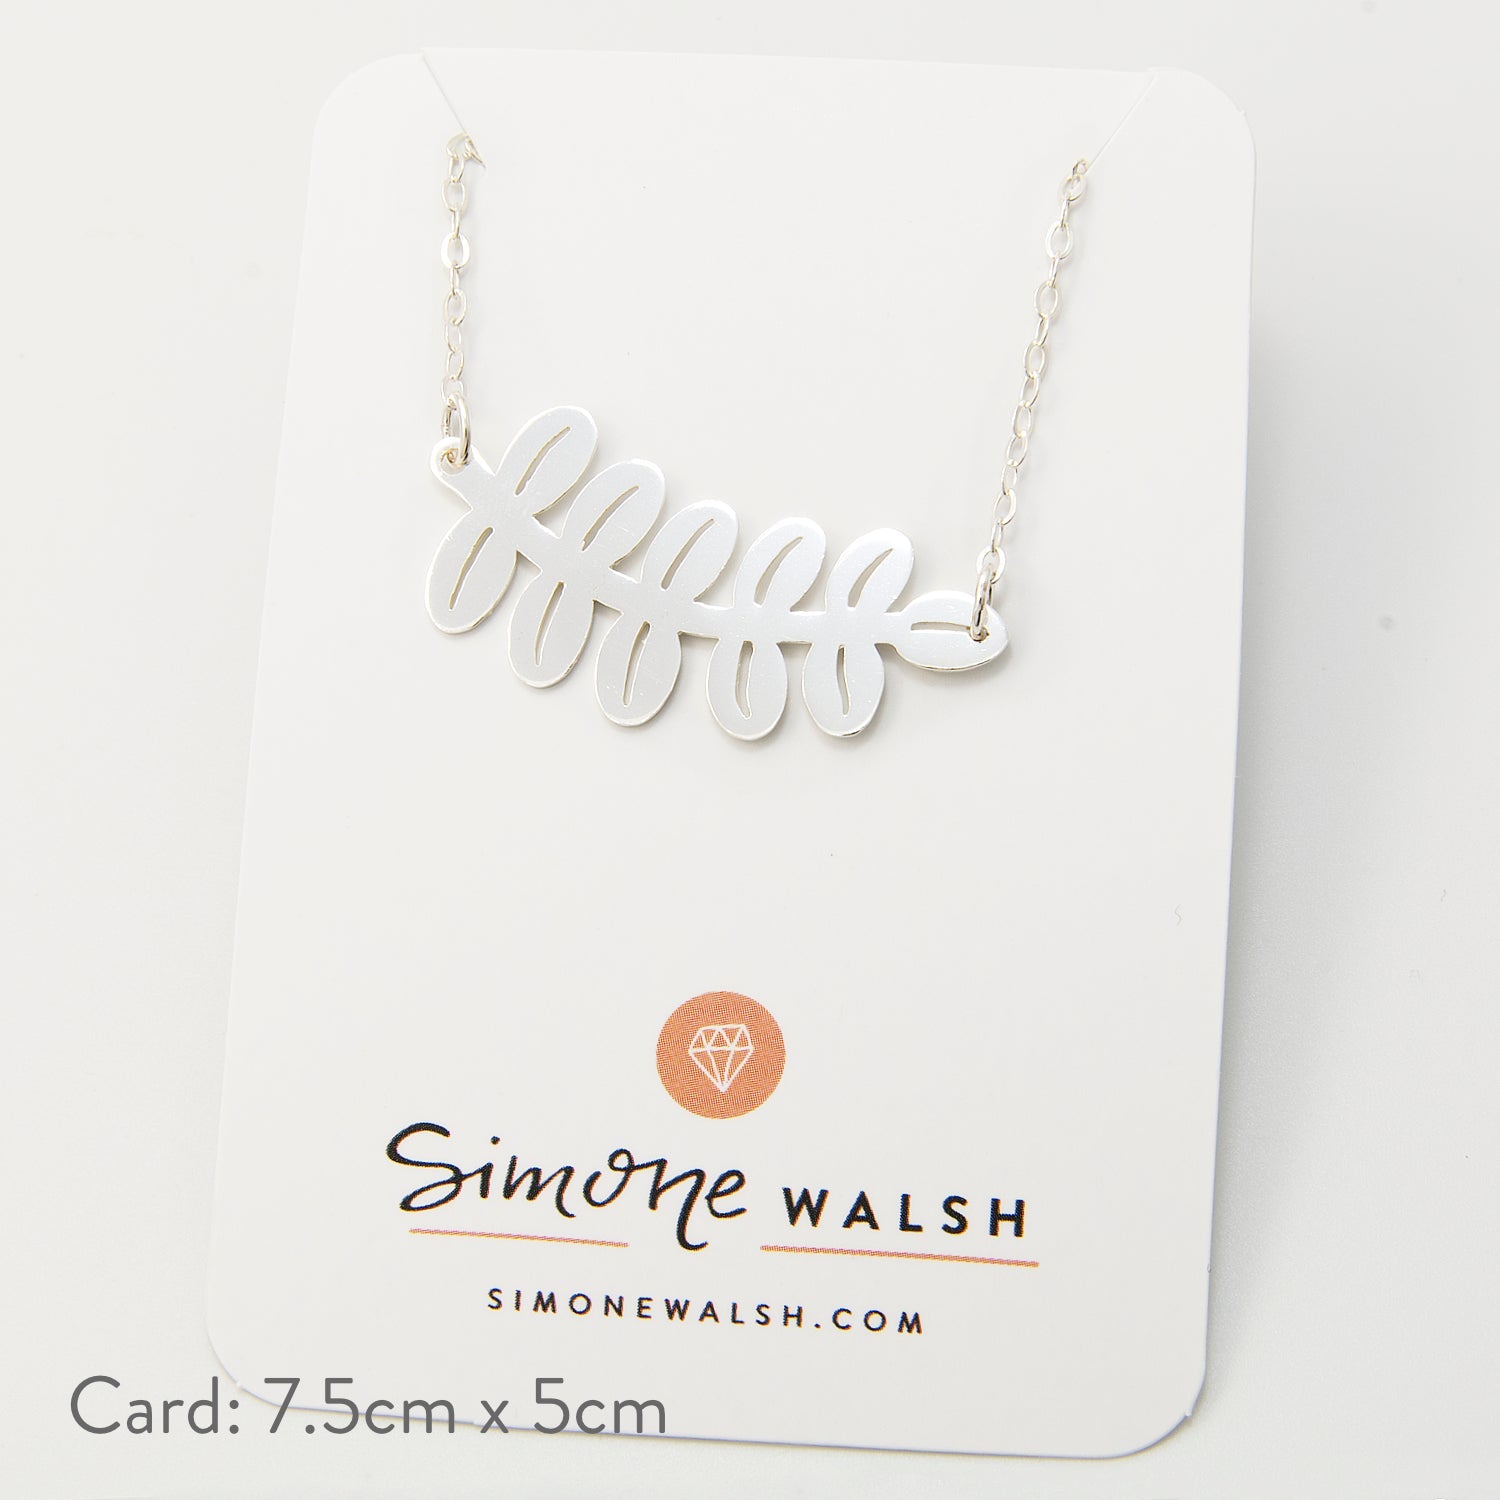 Silver Dollar Leaves Chain Necklace - Simone Walsh Jewellery Australia